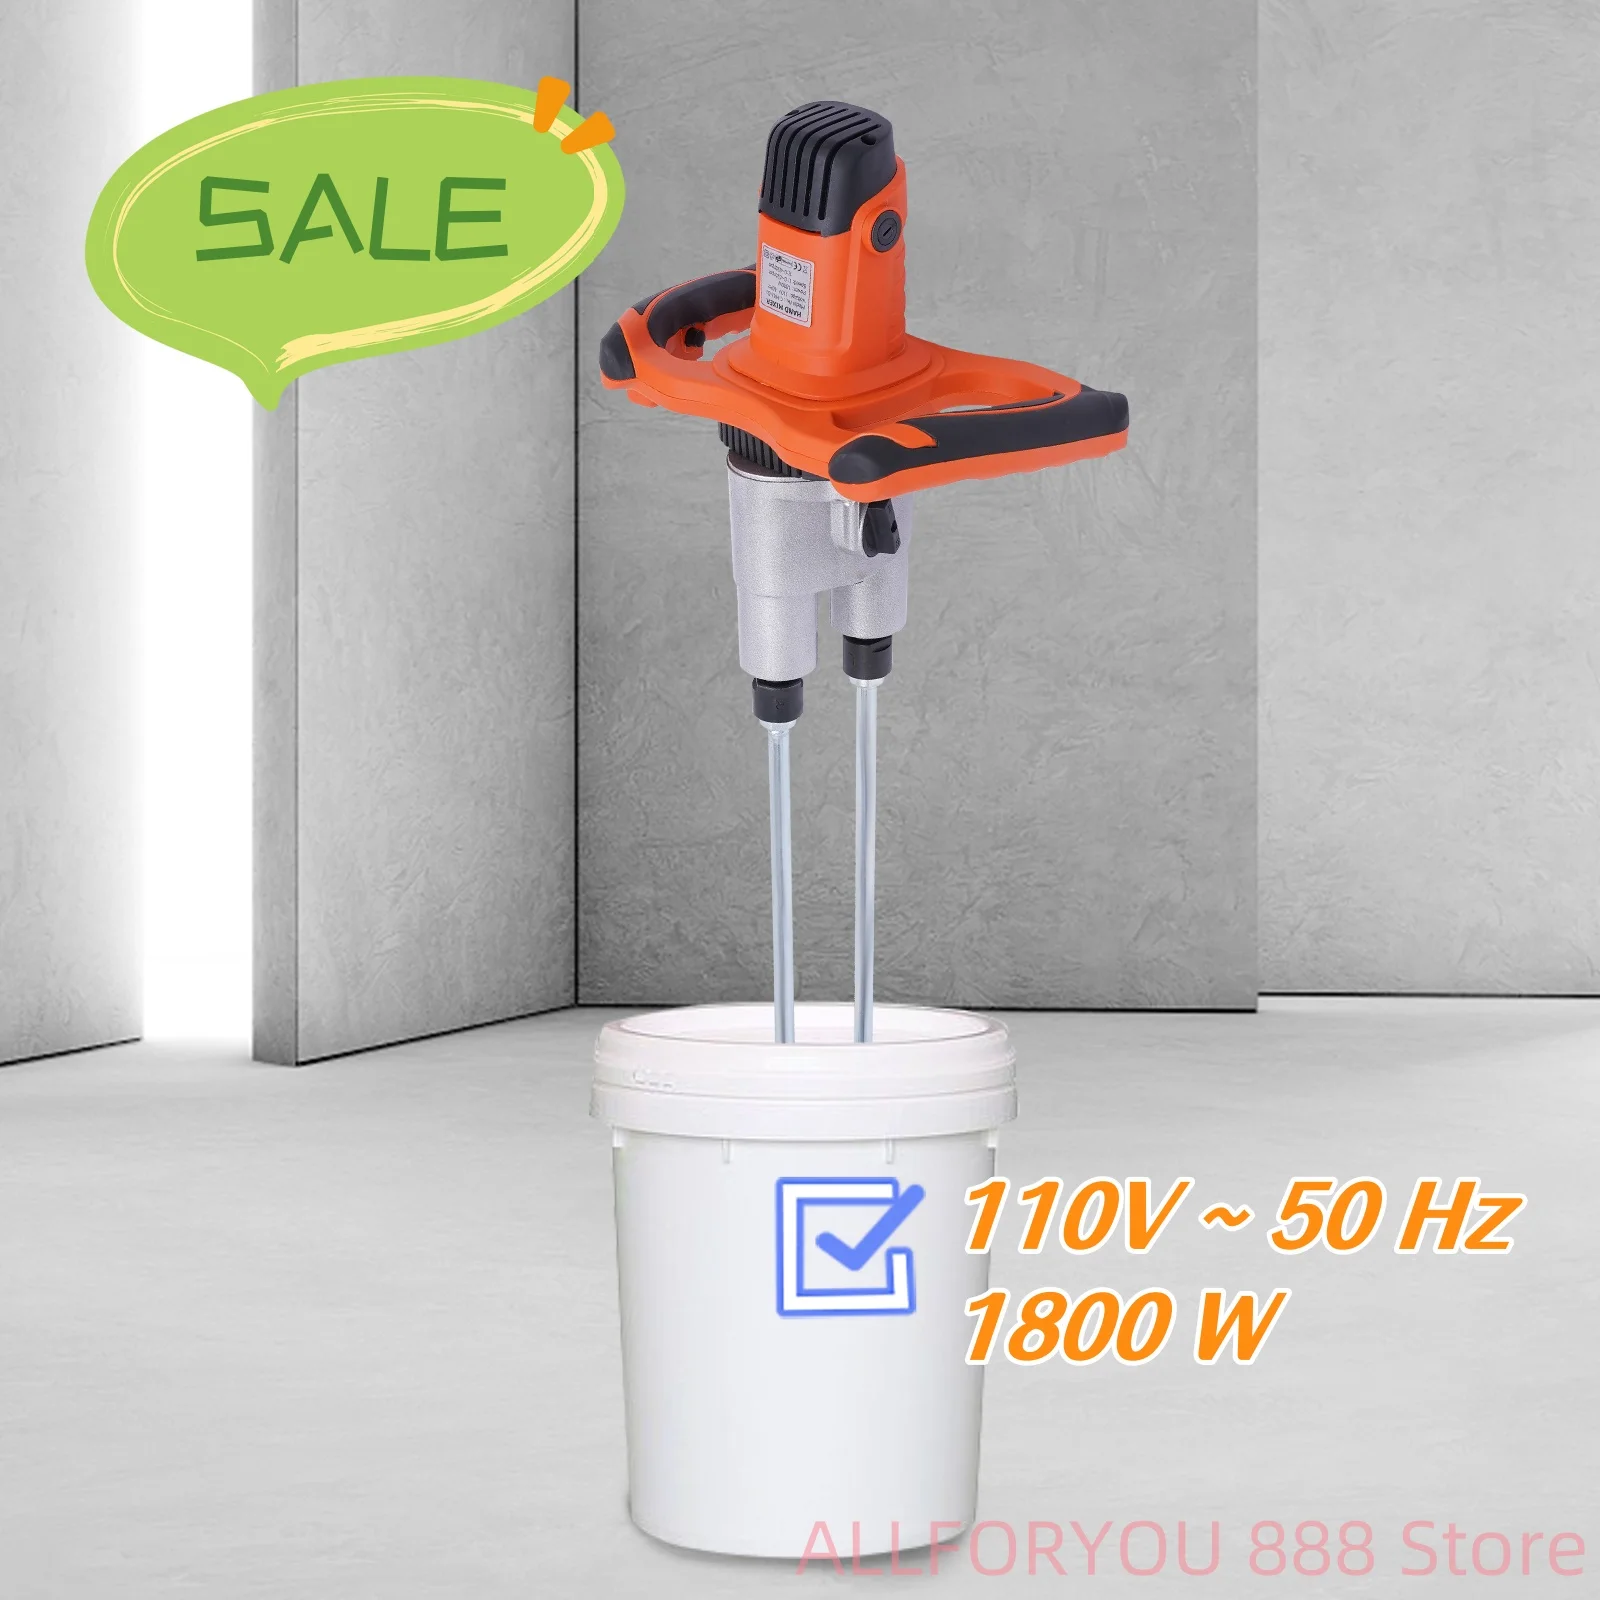 1800W Double Paddle Electric Mortar Mixer 2 Speed with Robust Aluminum Die-cast Housing Powerful and Handy 17 robust aluminum alloy housing vesa mount gs170sxa series with touch screen displays 1280x1024 industrial lcd monitor